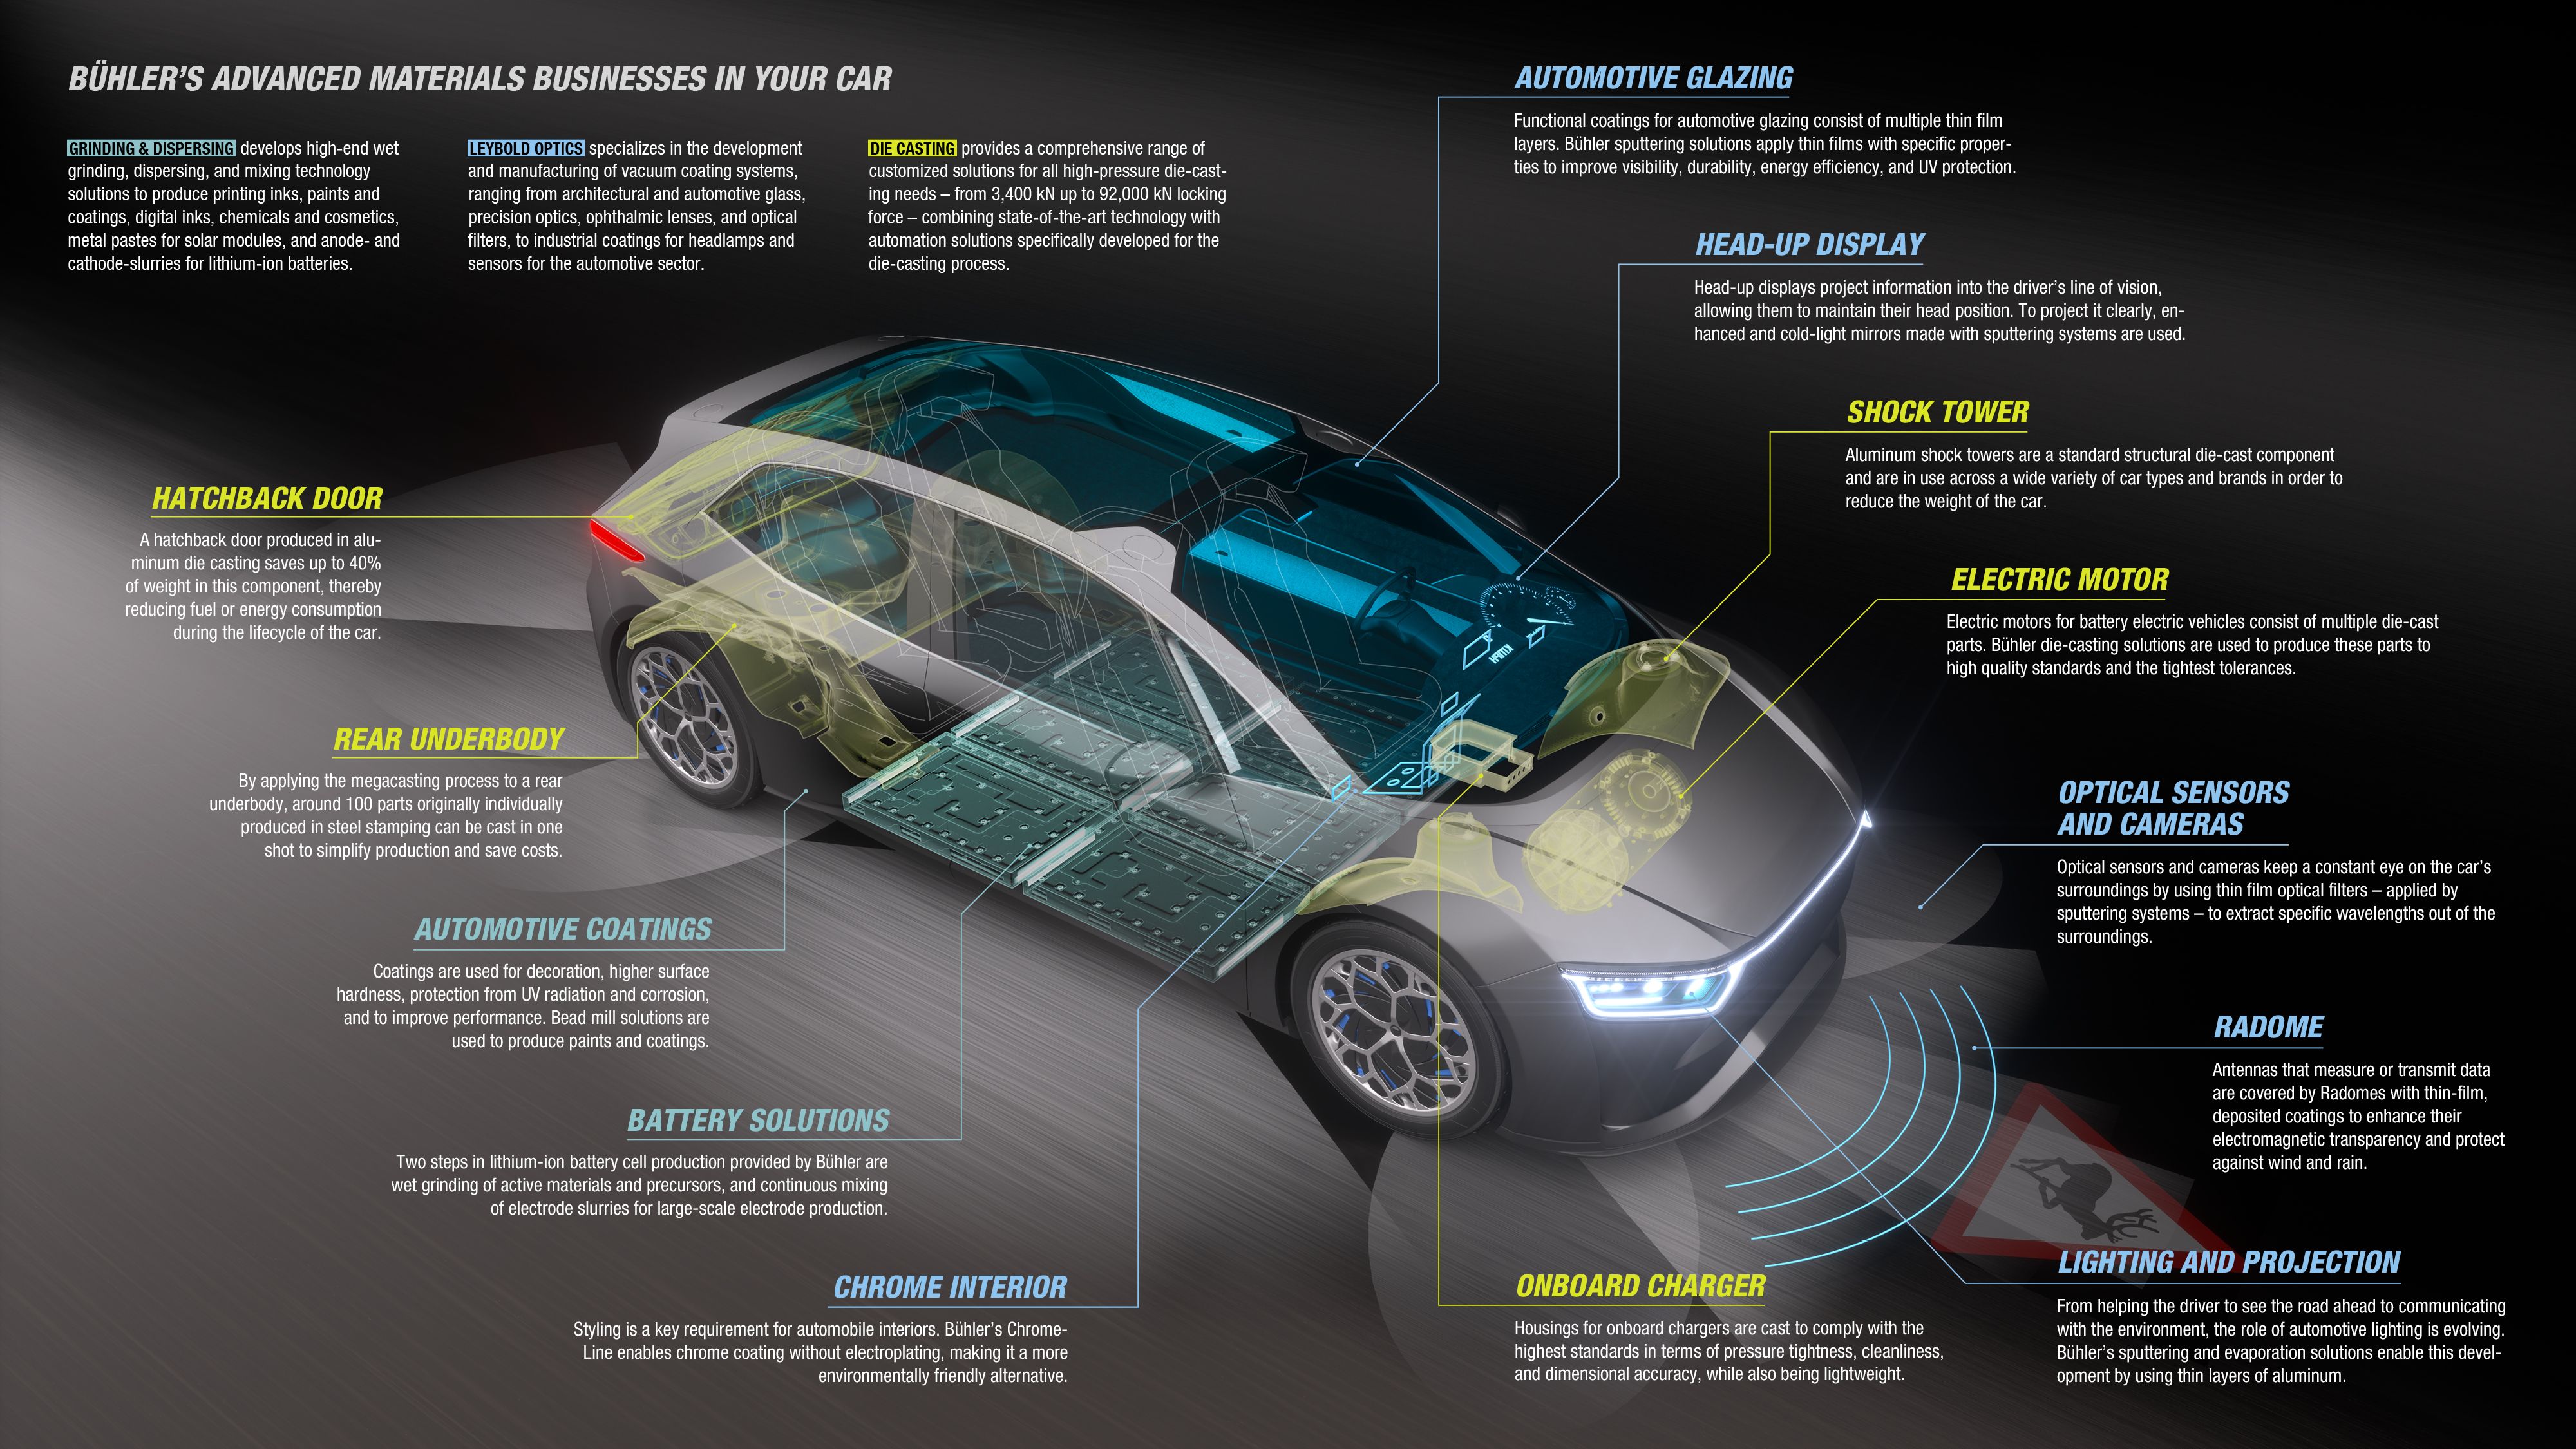 Bühler's Advanced Materials solutions for the automotive industry. 